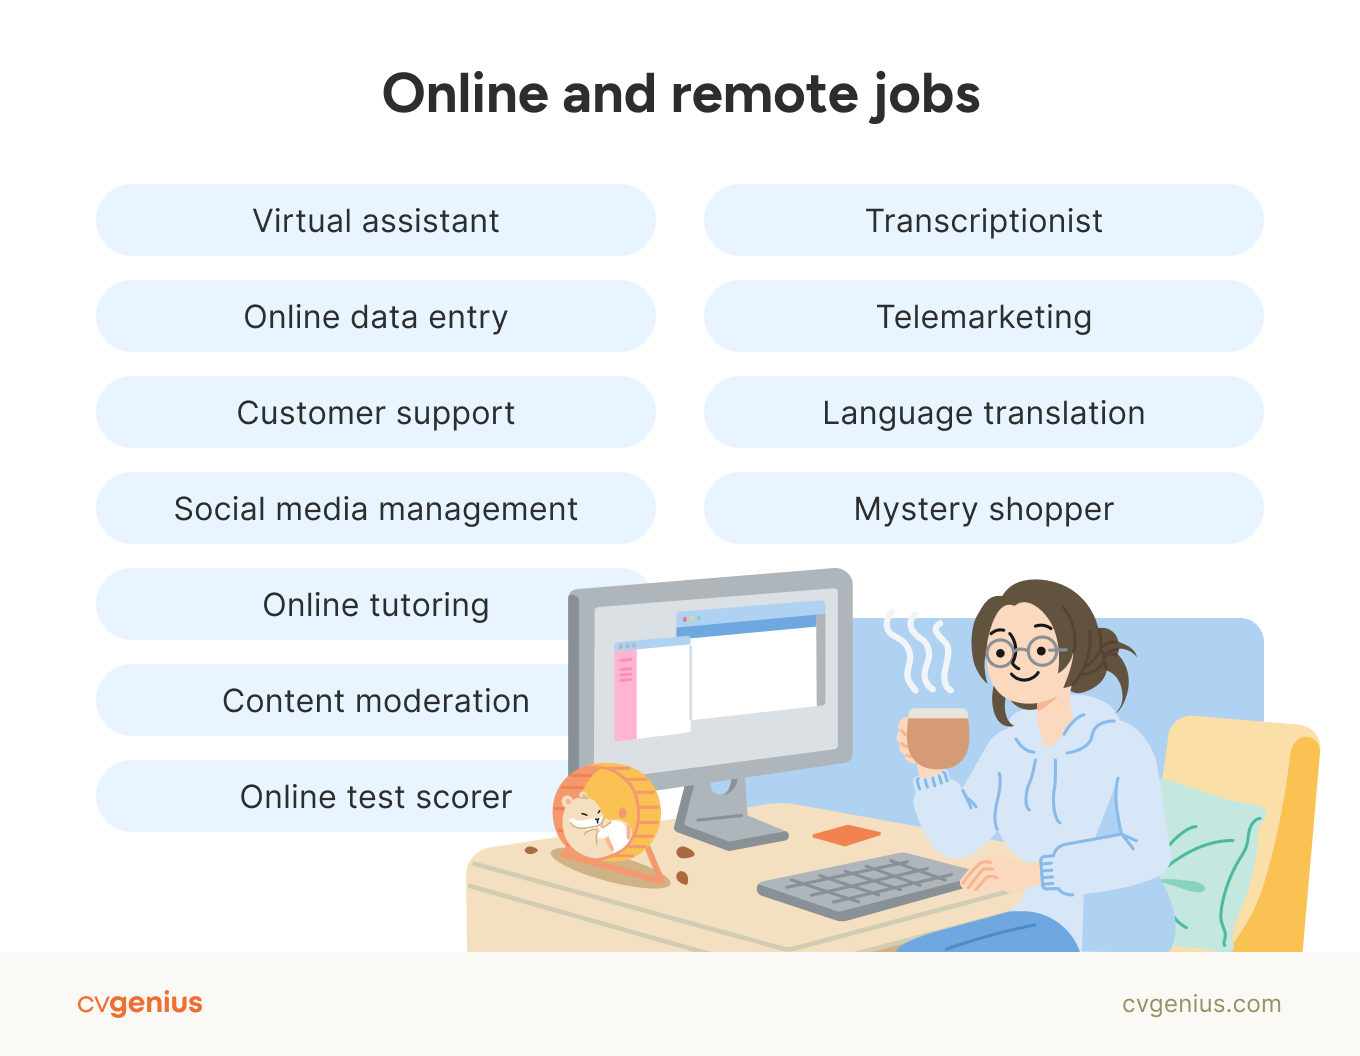 A list of online and remote jobs that don't always require a CV.